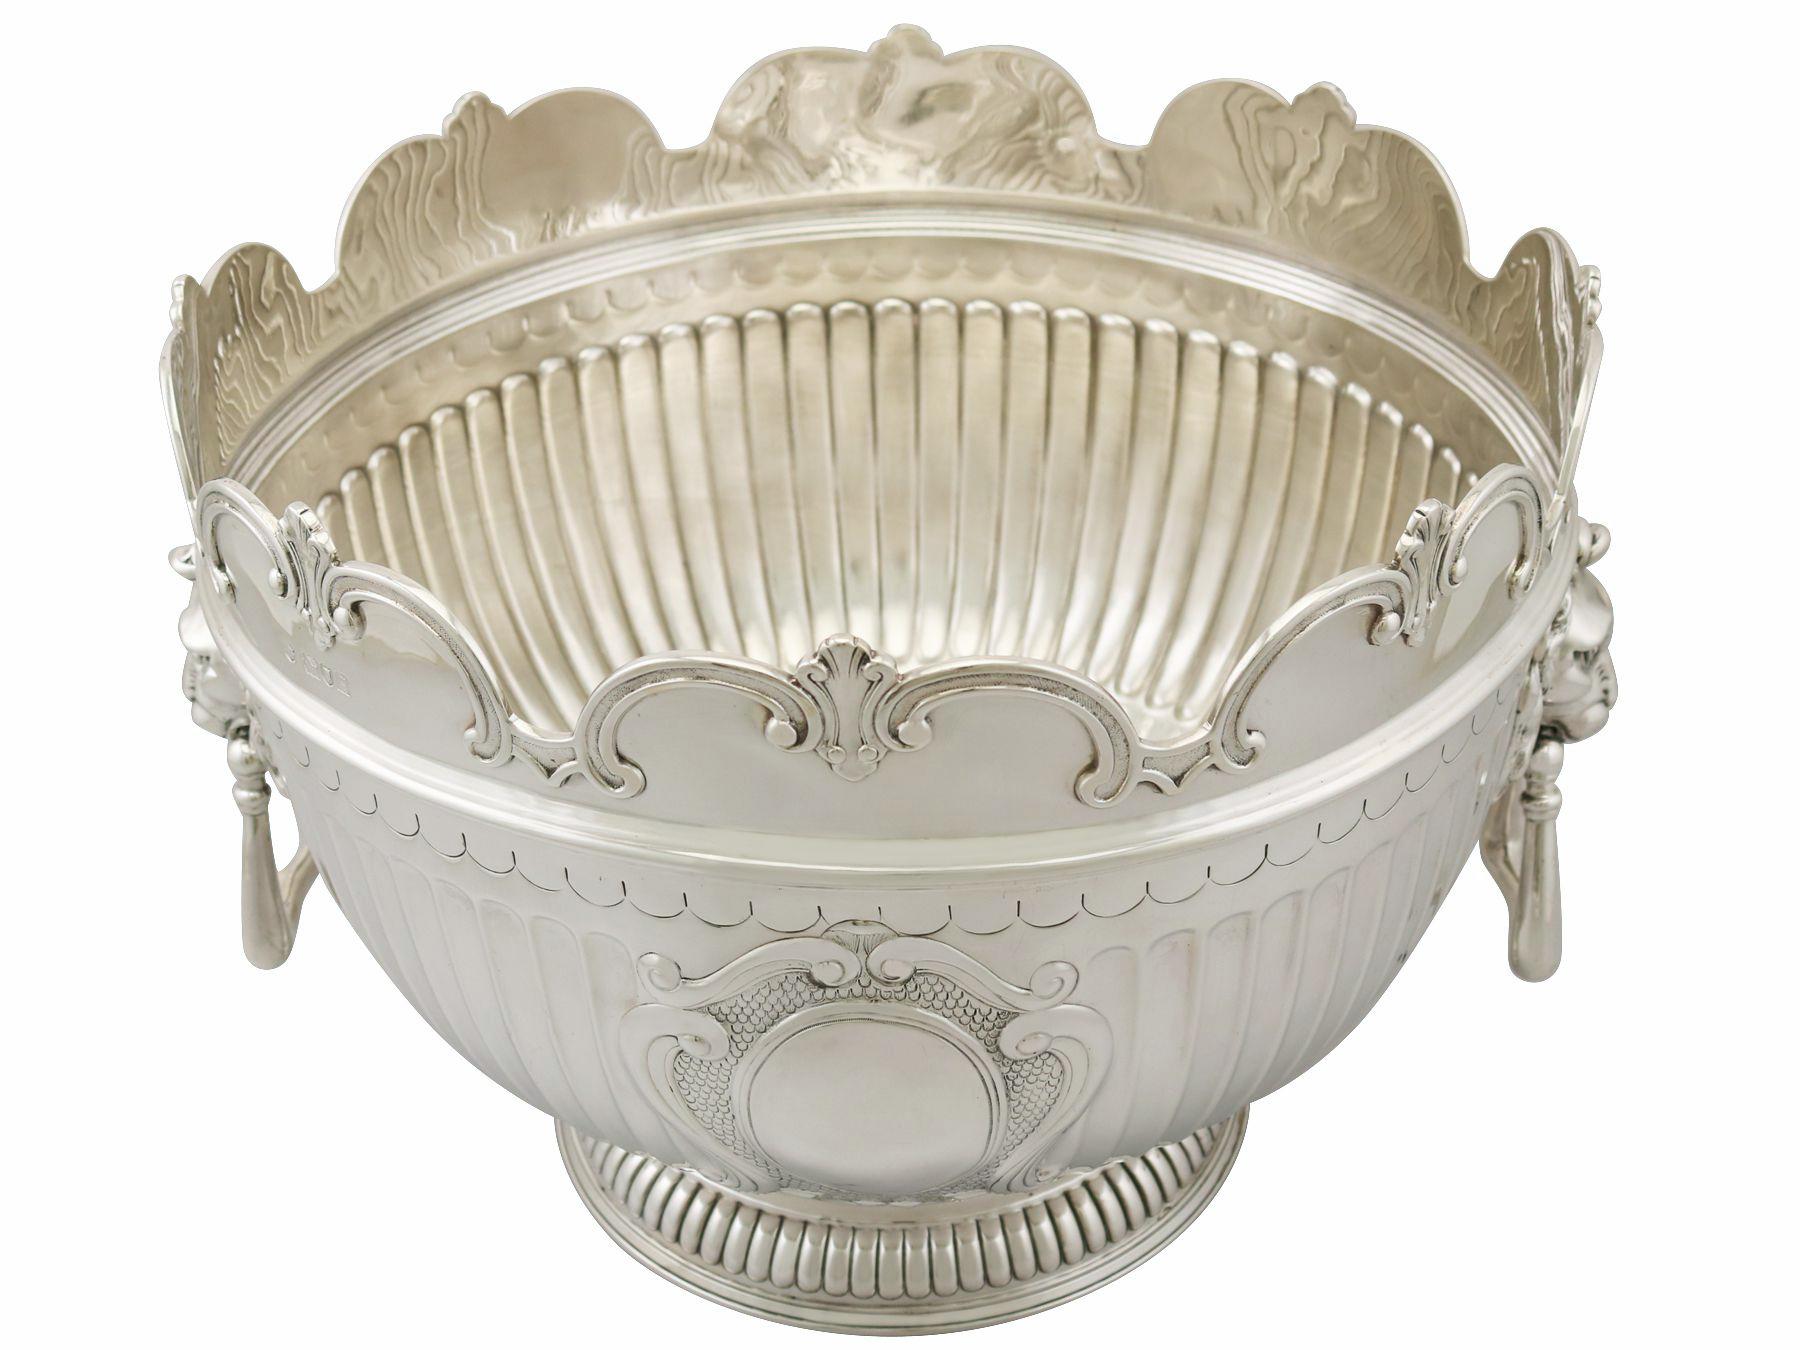 A magnificent, fine and impressive, large antique Edwardian English sterling silver Monteith style bowl; an addition to our range of collectable silverware

This magnificent antique Edwardian silver bowl, in sterling standard, has a Monteith form